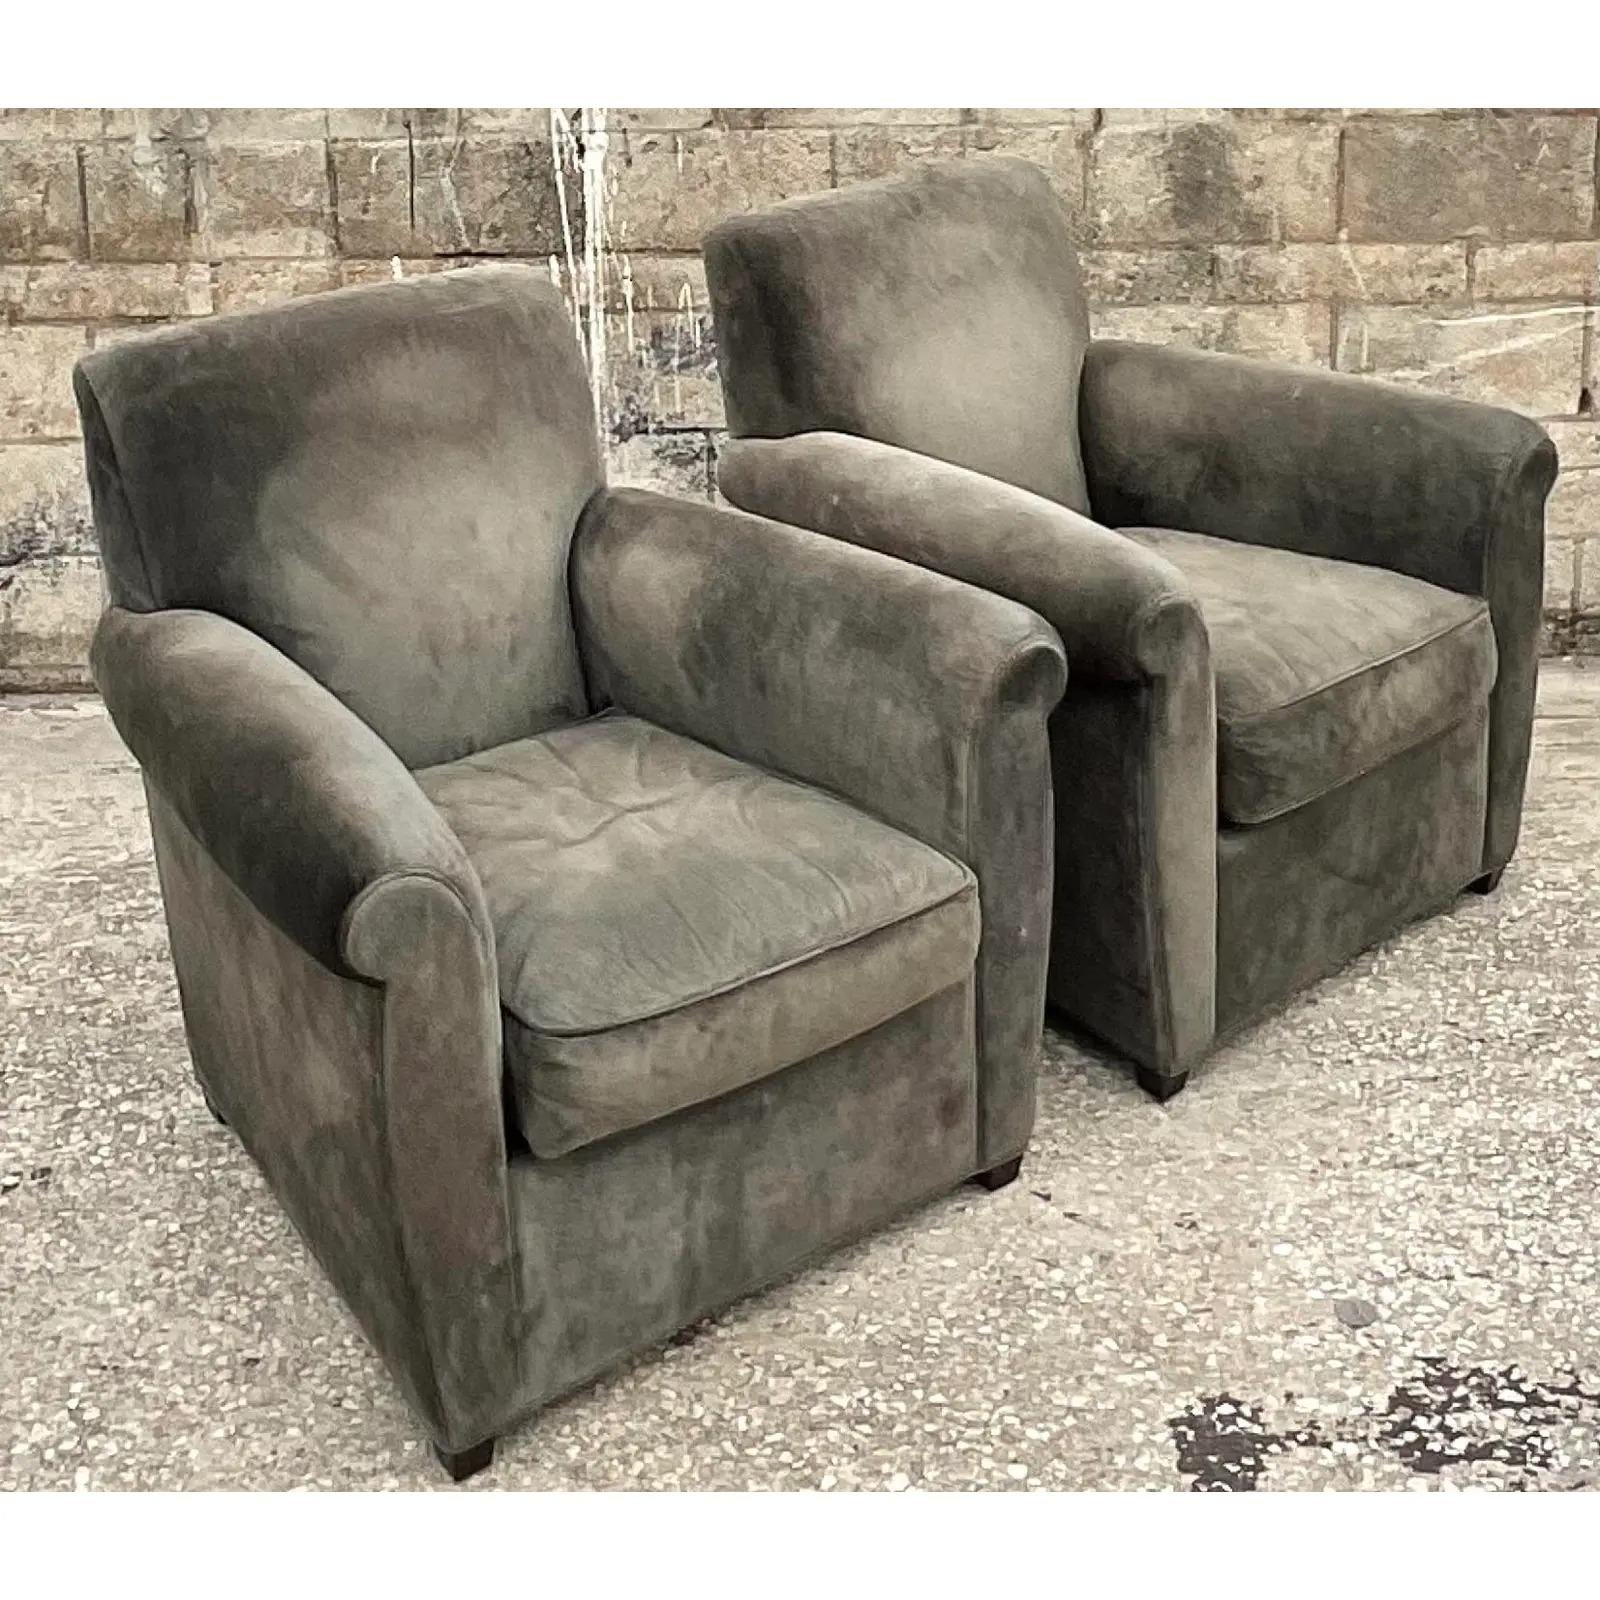 Incredible pair of vintage club chairs. Made by the iconic Baker Furniture group in collaboration with Coach leather goods. A beautiful smoke colored suede with lots of chic patina from time. Like a well loved leather jacket. Tagged by both Coach